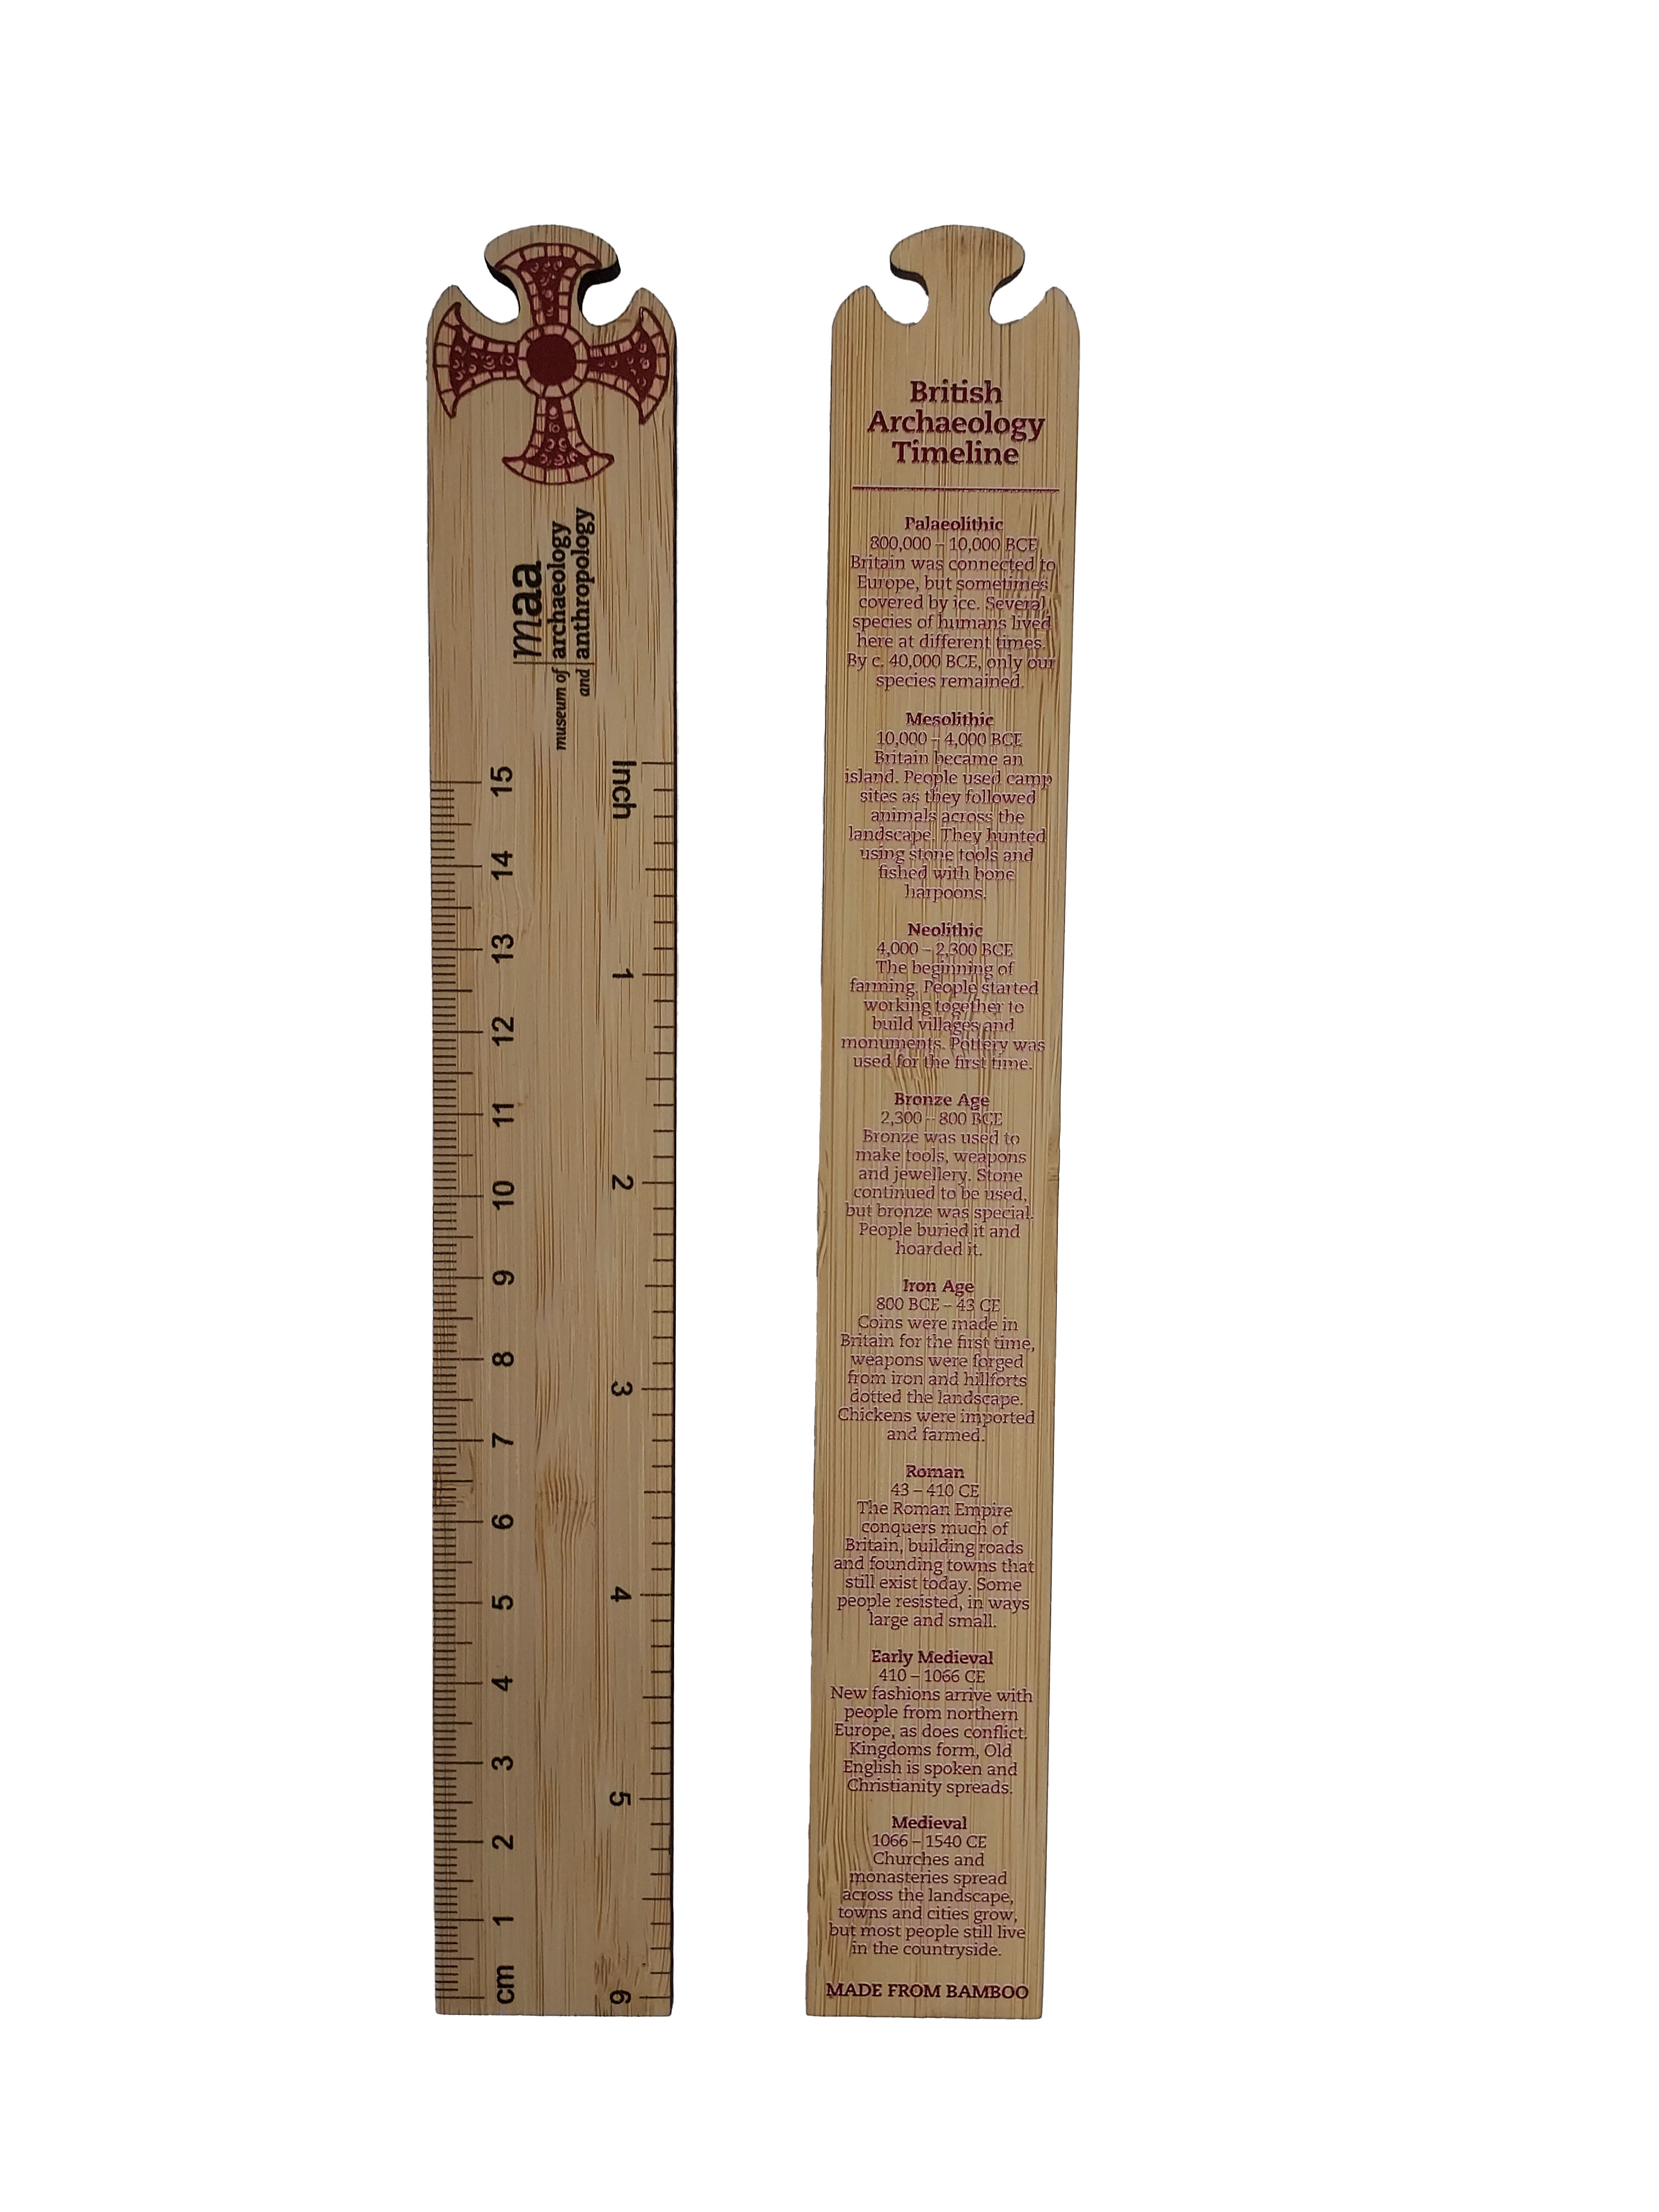 Two 15cm rulers side by side. The left hand ruler shows measurements in cm and inches and has a depiction of the Trumpington Cross at the top. The second shows a timeline of British Archaeological periods.